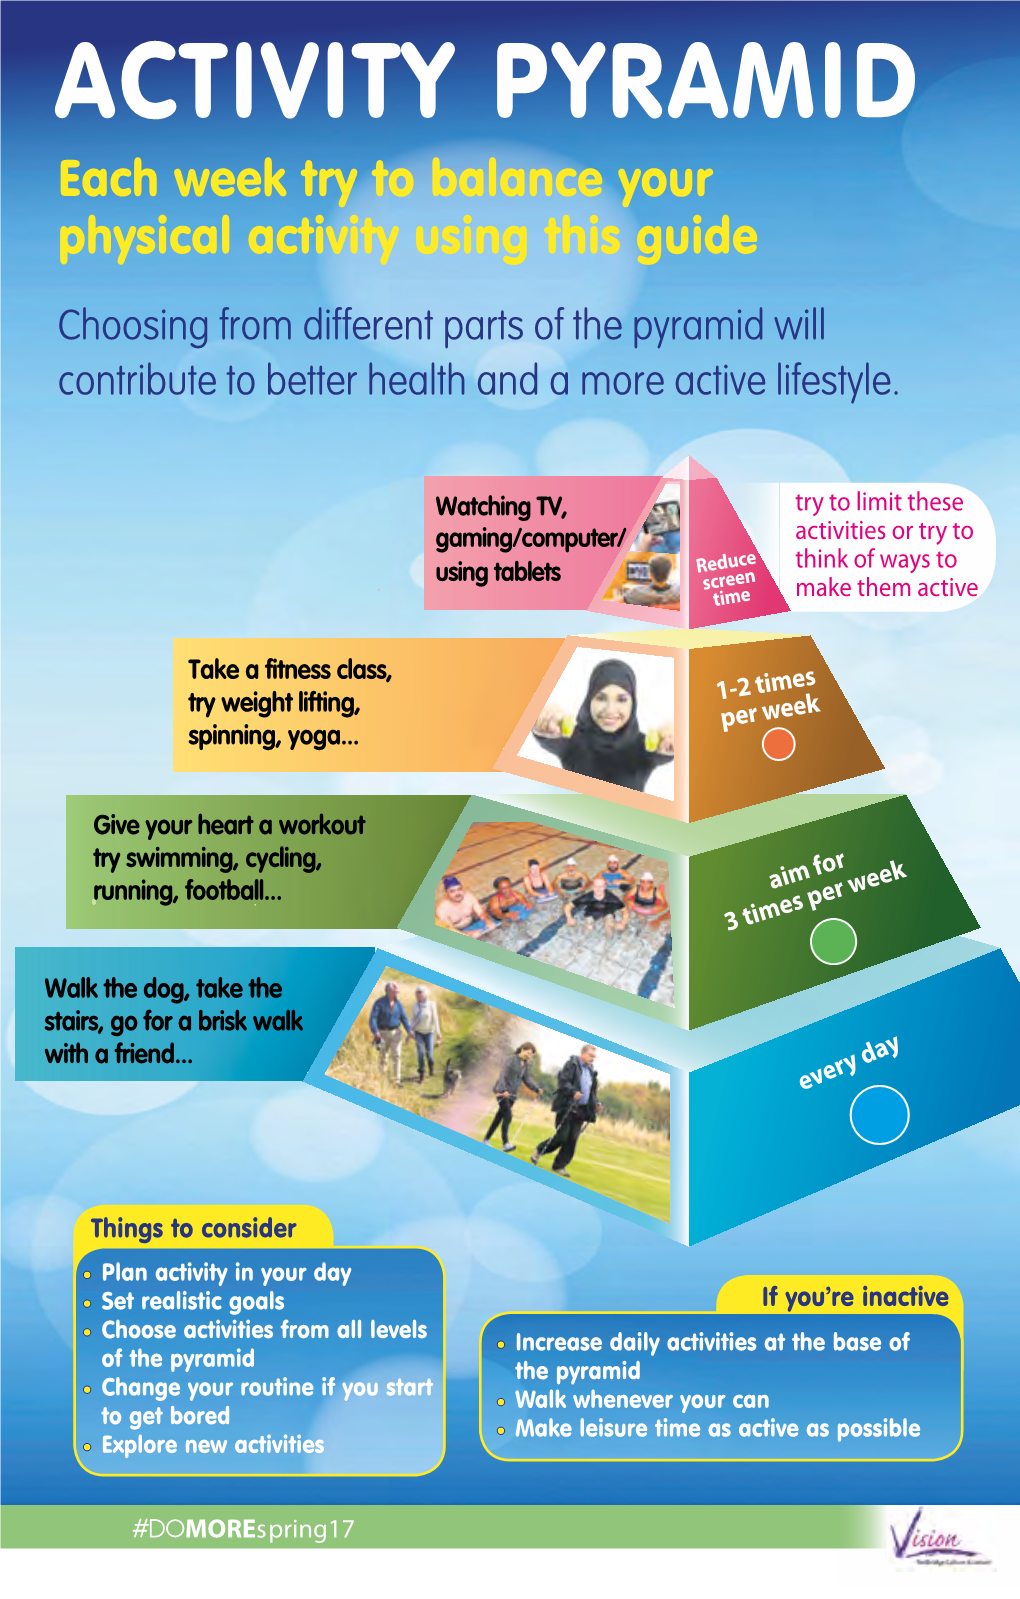 ACTIVITY PYRAMID Each Week Try to Balance Your Physical Activity Using This Guide